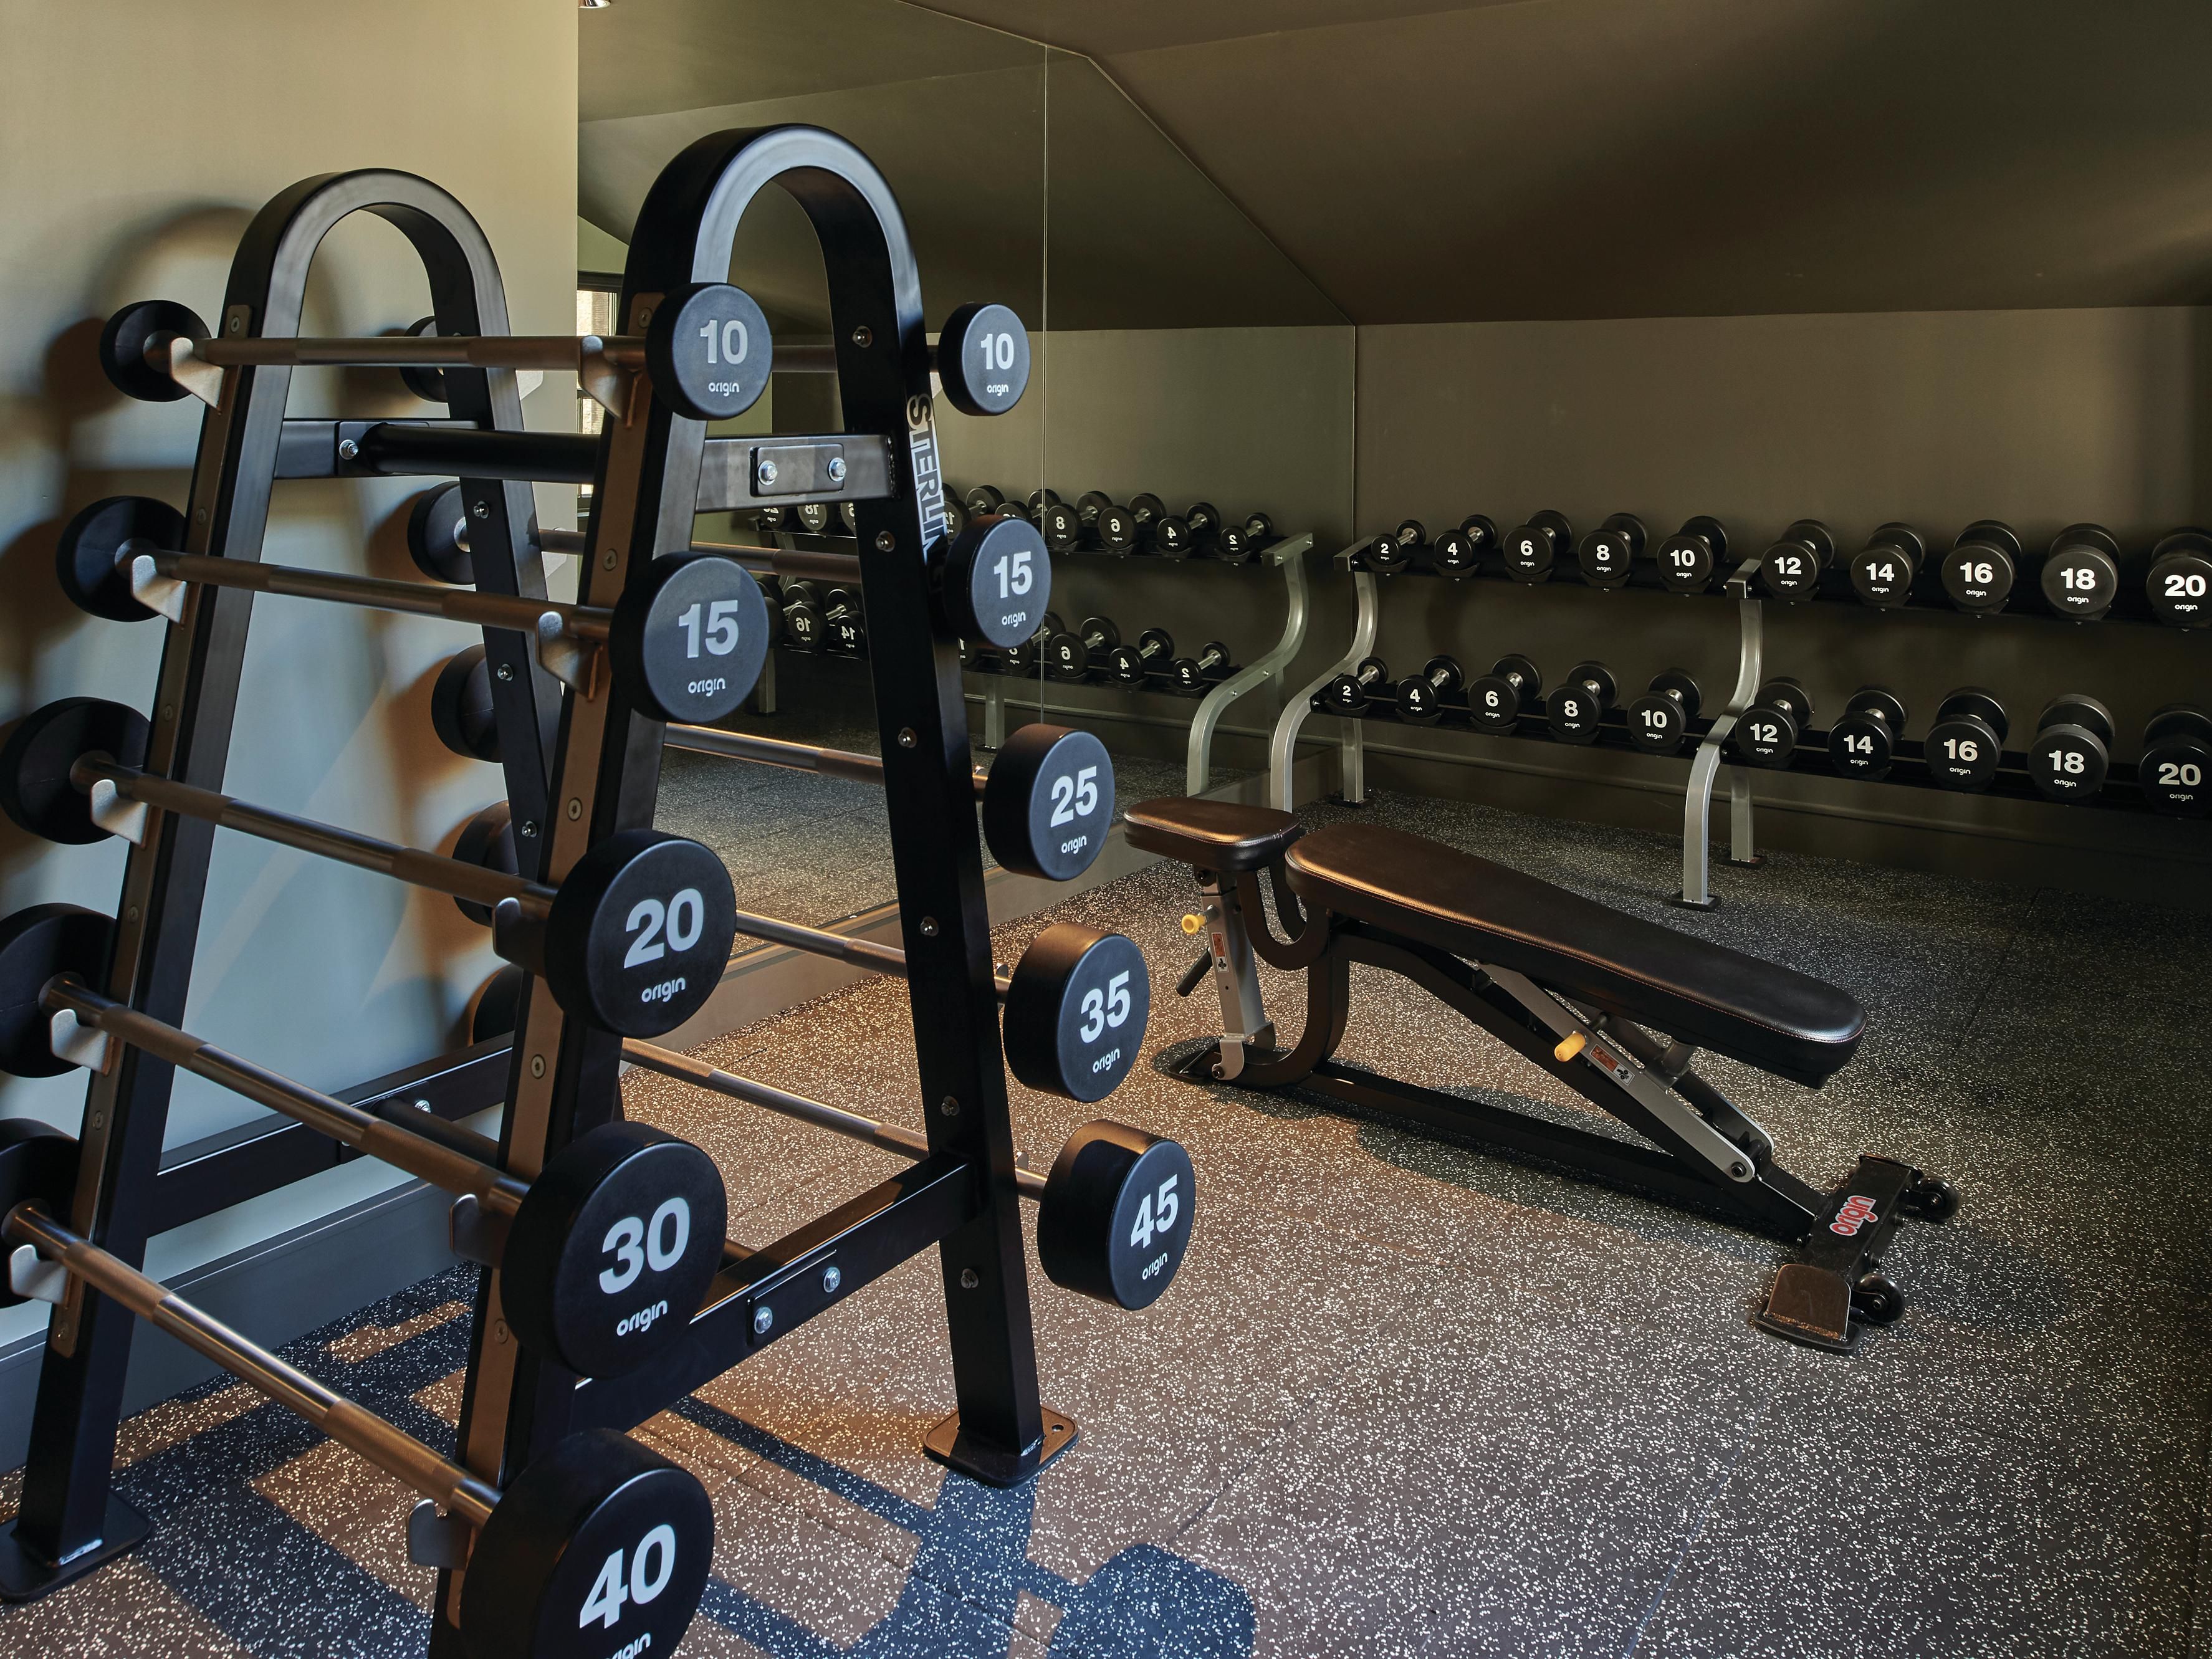 Keep up your training away from home in the state of the art Gym